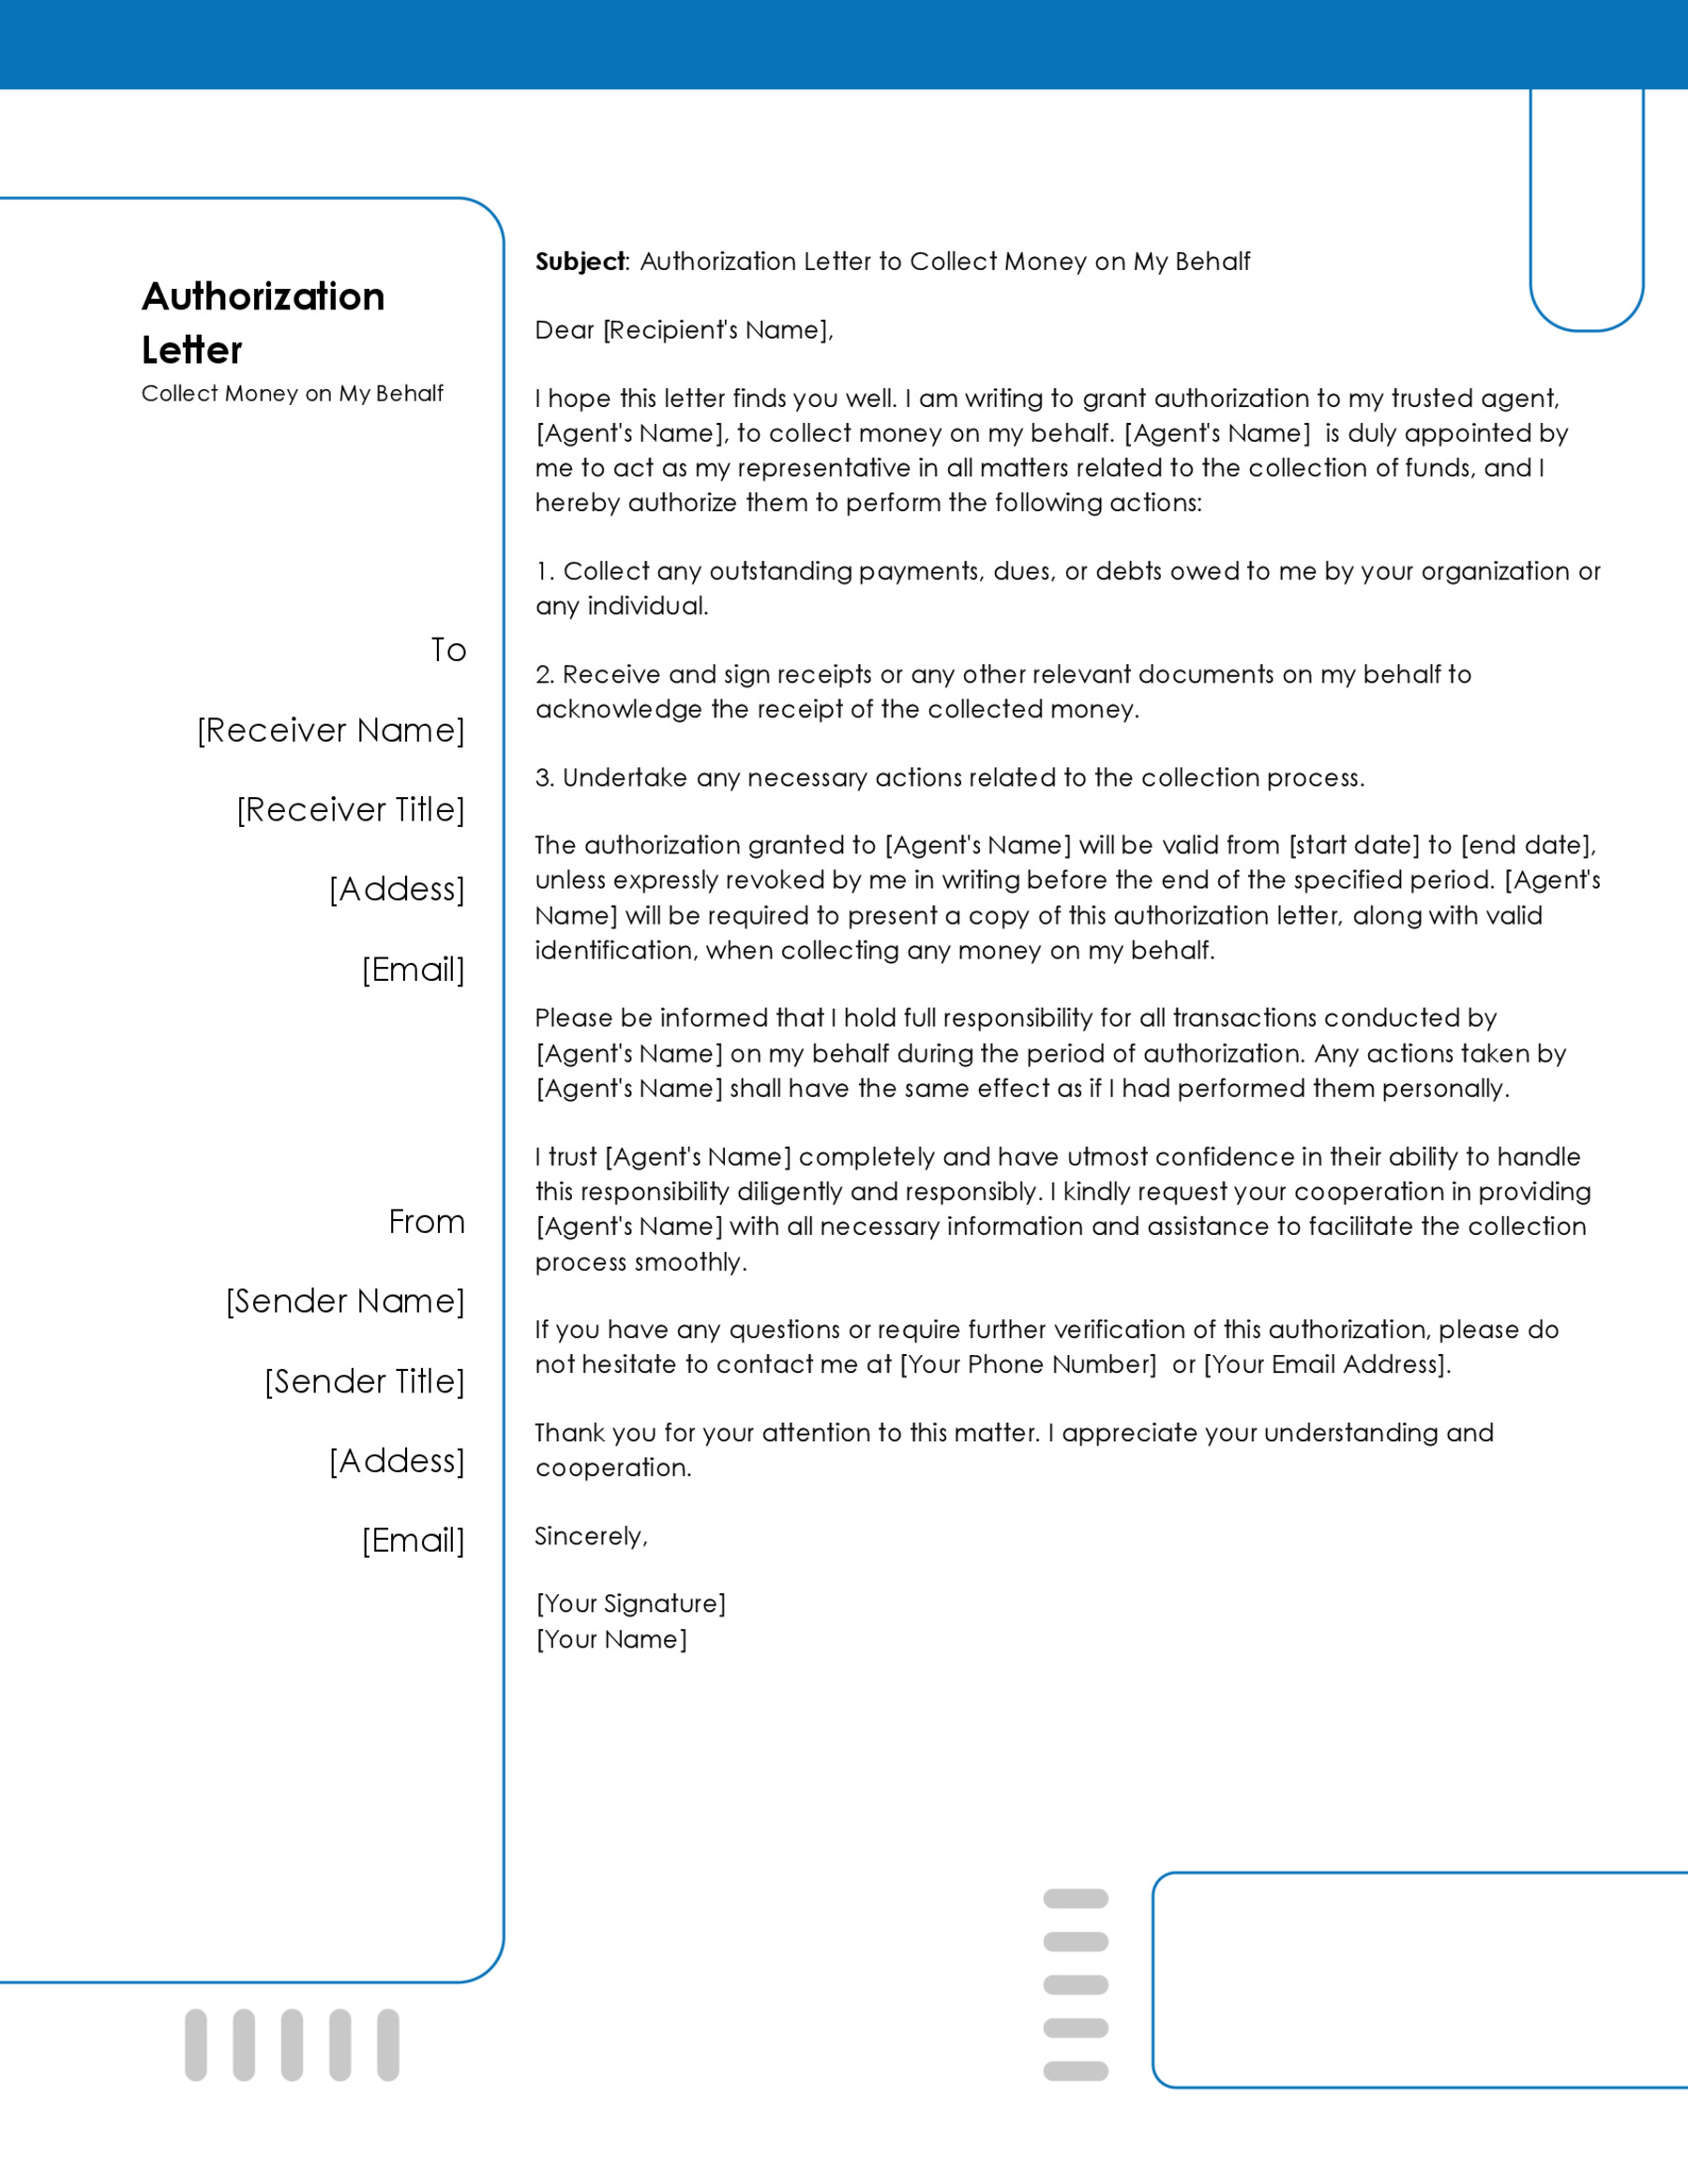 Letter to Collect Money on My Behalf Template Free download in ms word